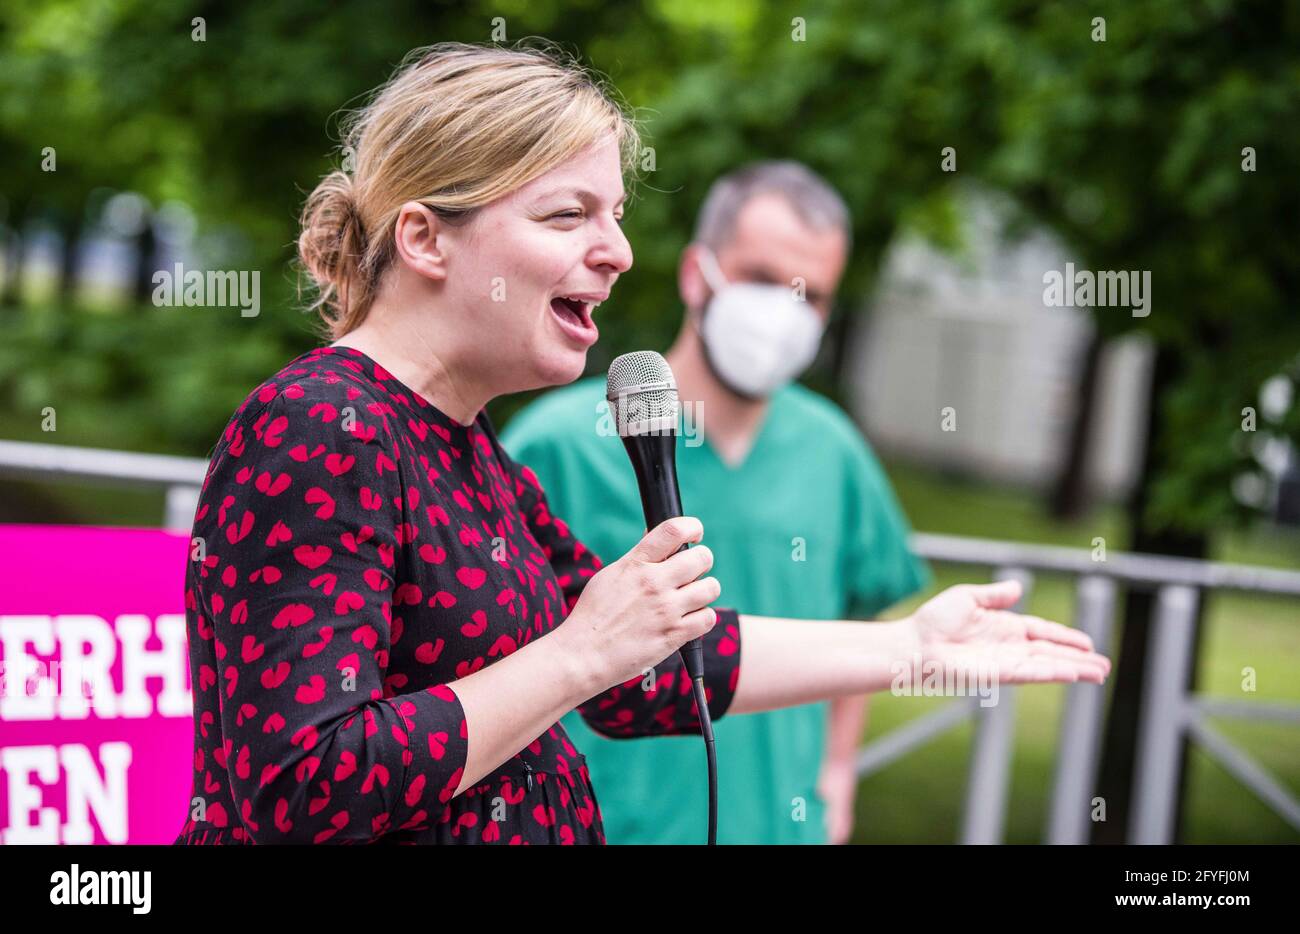 May 28, 2021, Munich, Bavaria, Germany: KATHARINA SCHULZE of the Bavarian Greens who often pointed at the Staatskanzlei while blaming ''the Soeder government'' for the poor working conditions for healthcare workers. The Bavarian Greens (die Gruenen/Buendnis90) organized a protest action at the Bavarian Staatskanzlei (government building) in support of healthcare workers. During the Coronavirus crisis, the working conditions for this sector have come into greater focus and The Greens are pushing for better politics for this sector where pay structures and working conditions are improved and th Stock Photo